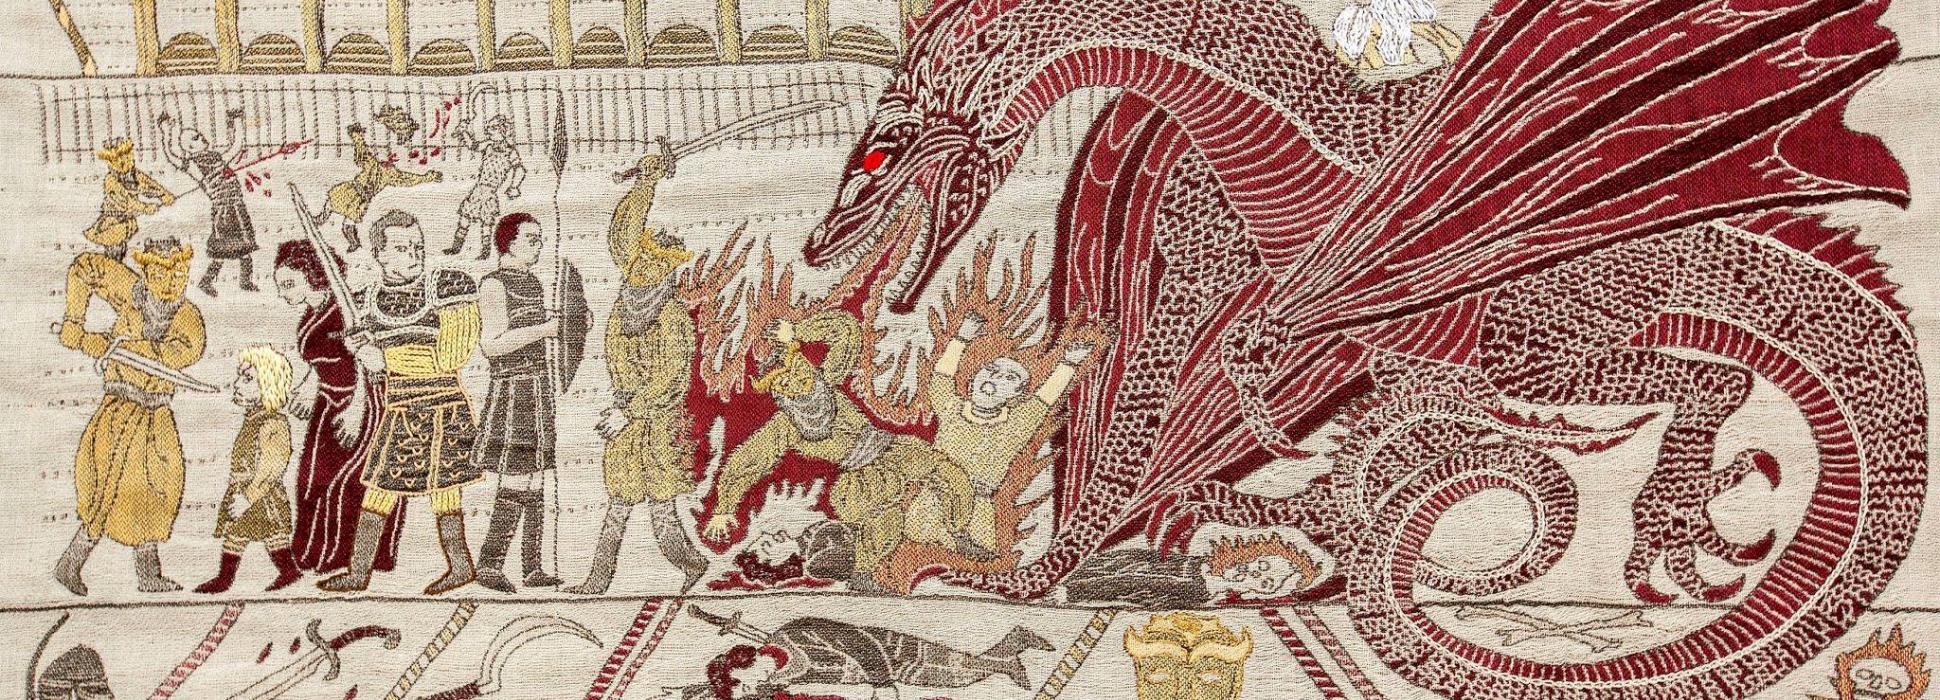 In Bayeux, the Hotel du Doyen exhibits a tapestry on the theme of Game of Thrones until December 31st 2019